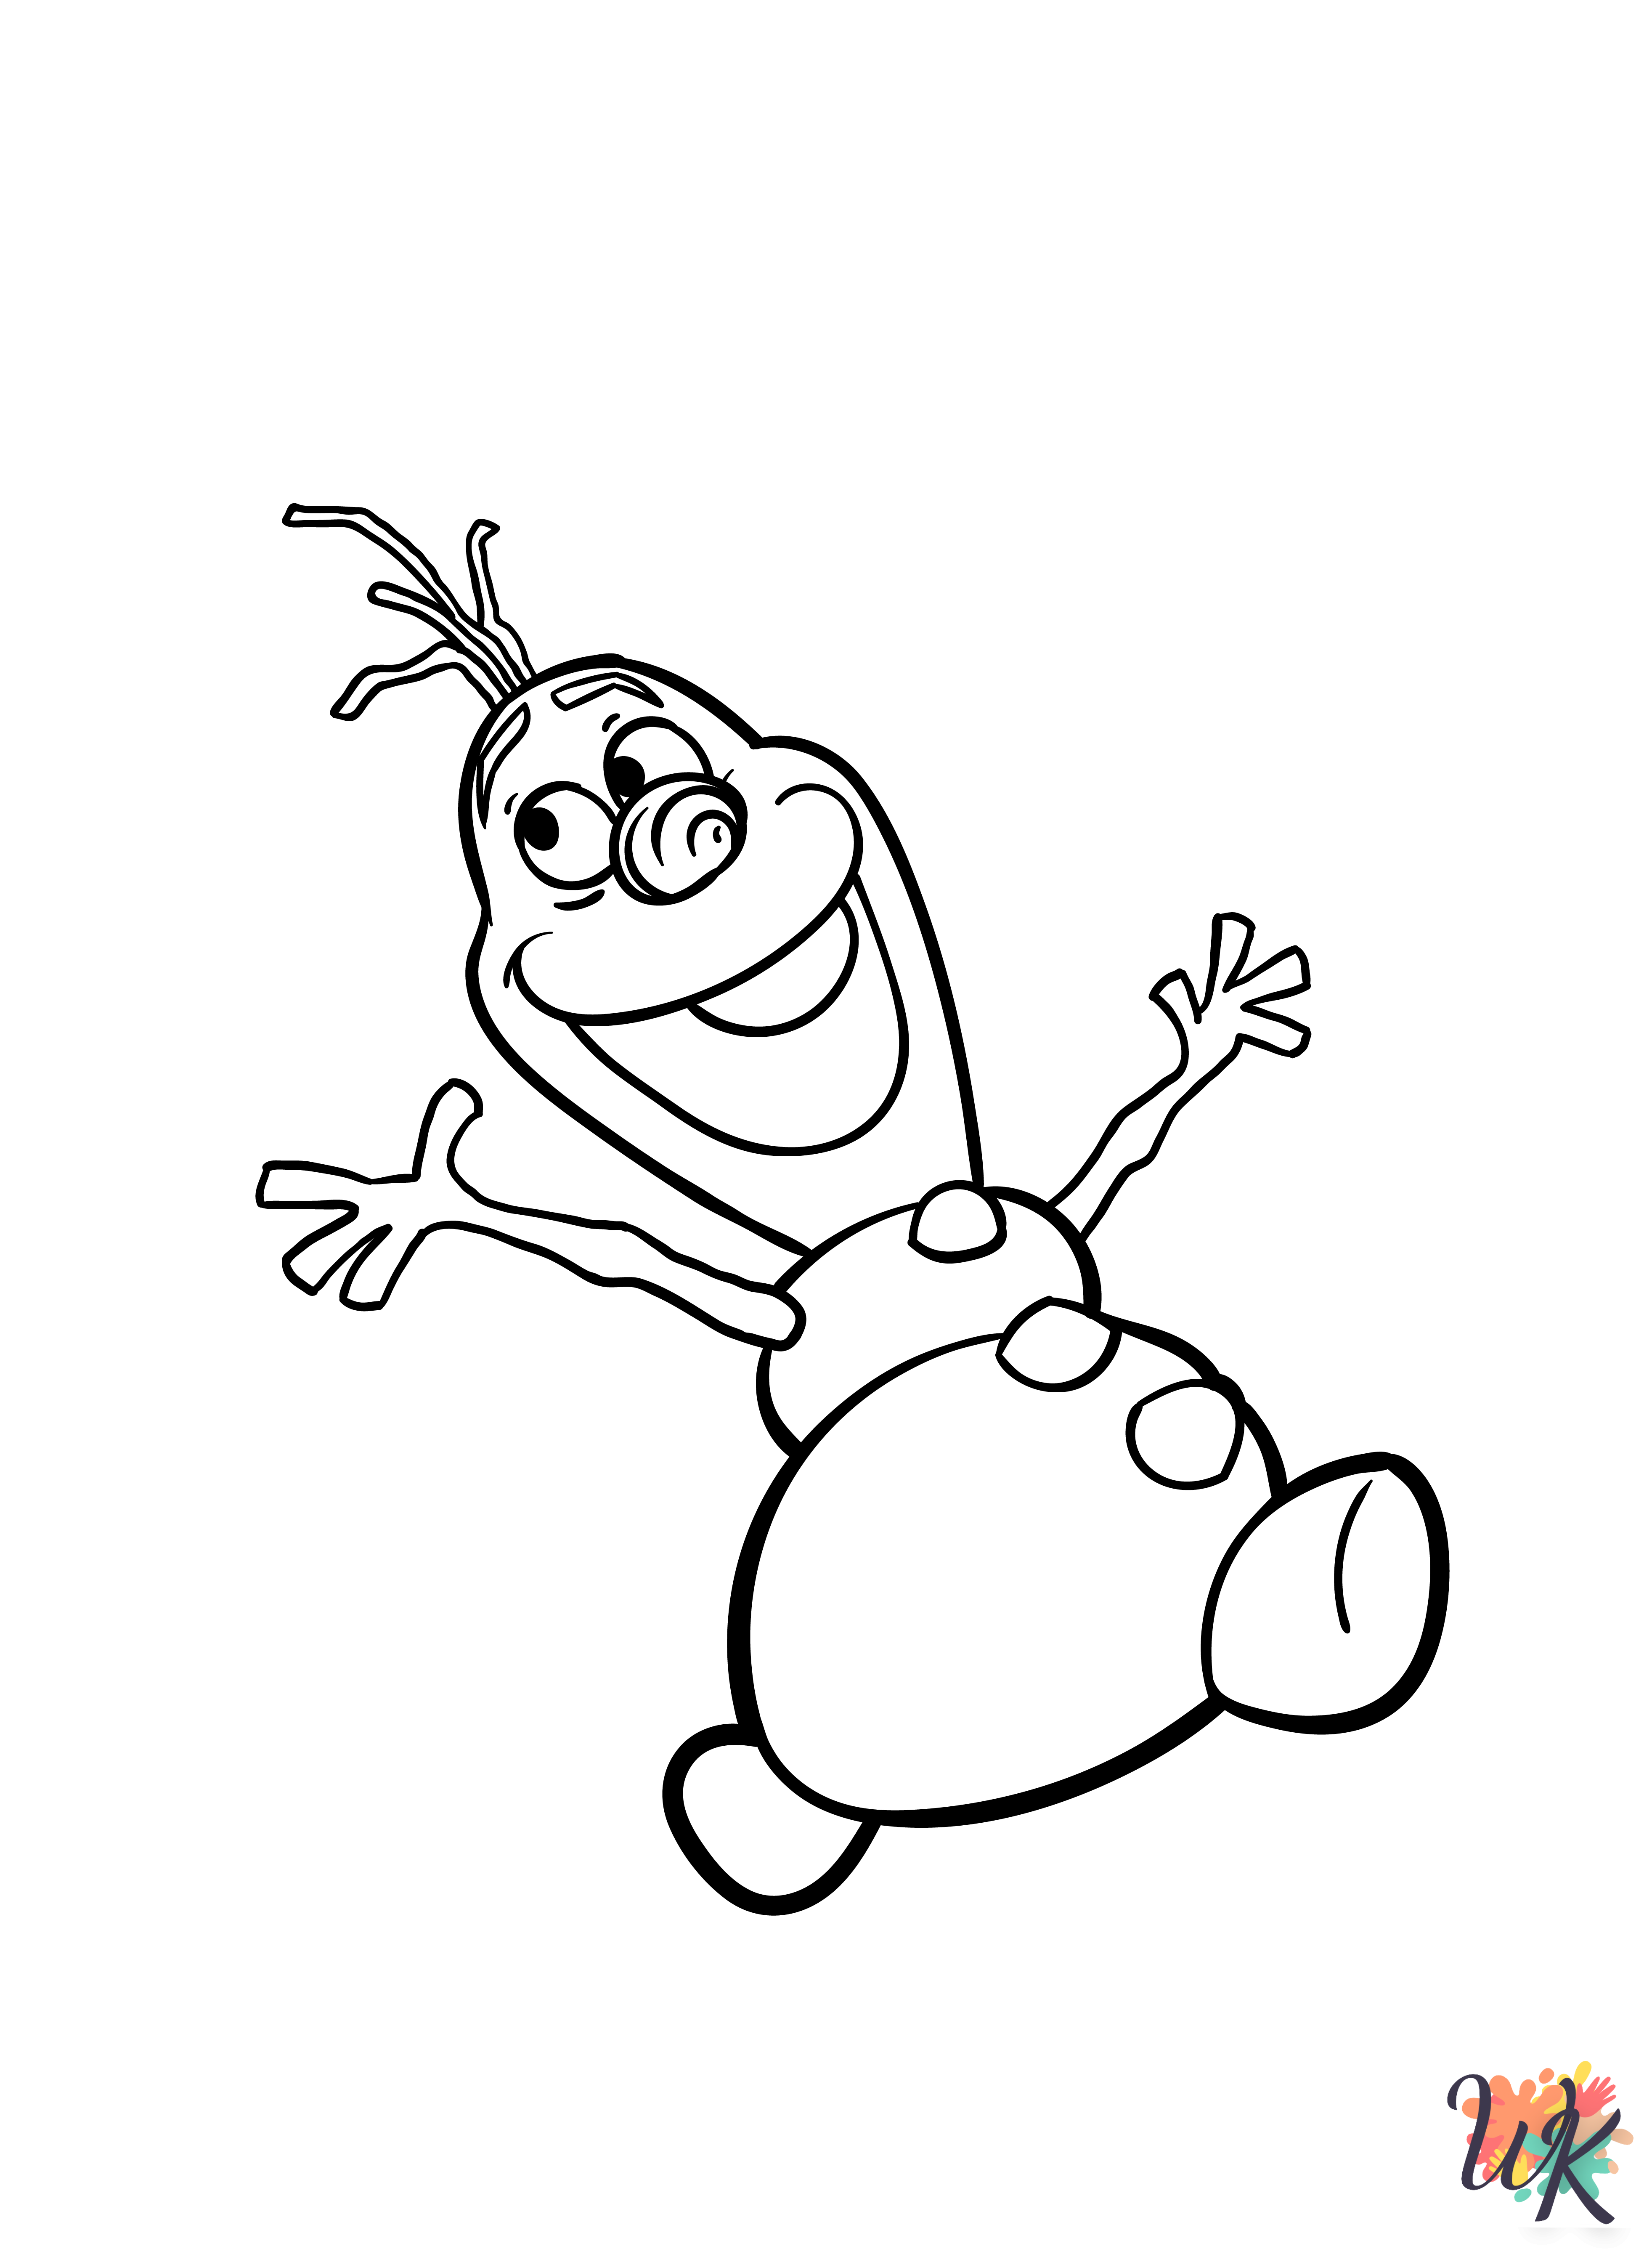 Olaf coloring pages for adults pdf